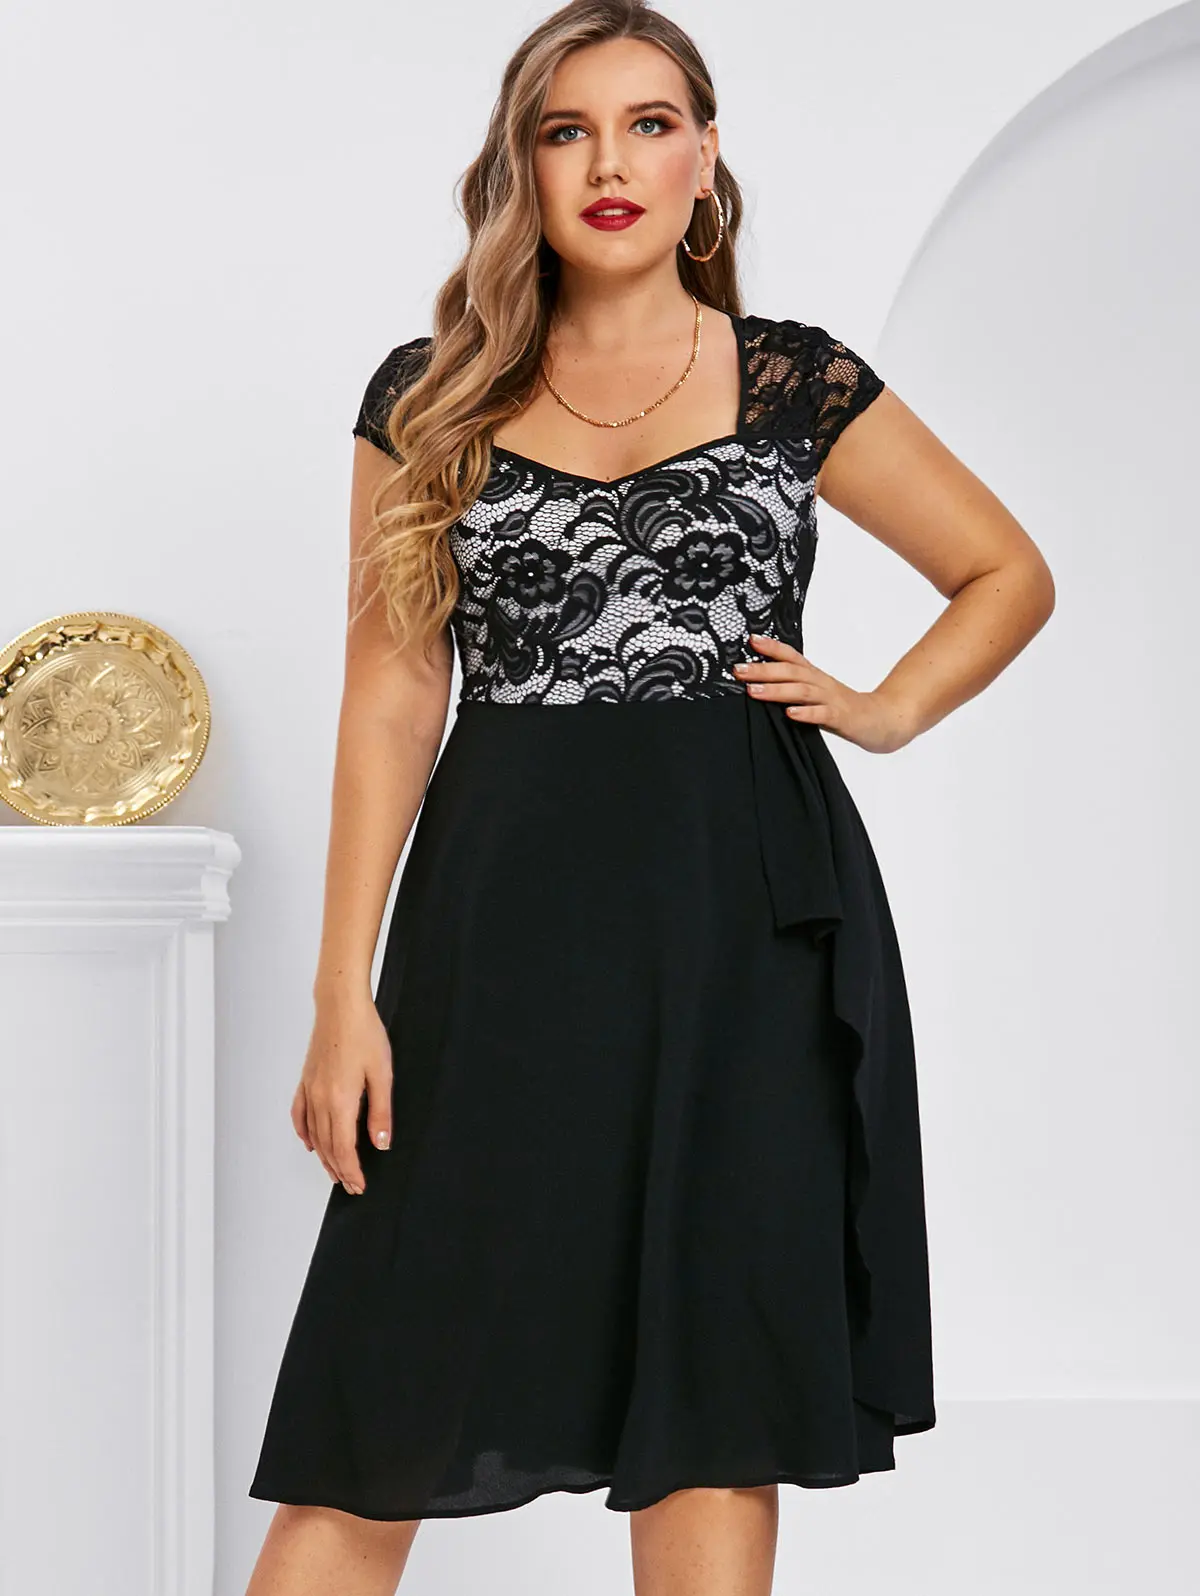 

ROSEGAL Lace Insert Ruffled Party Dresses Black Plus Size Semi Formal Prom Cocktail Dress Women Midi Fit And Flare Vestidos 5XL